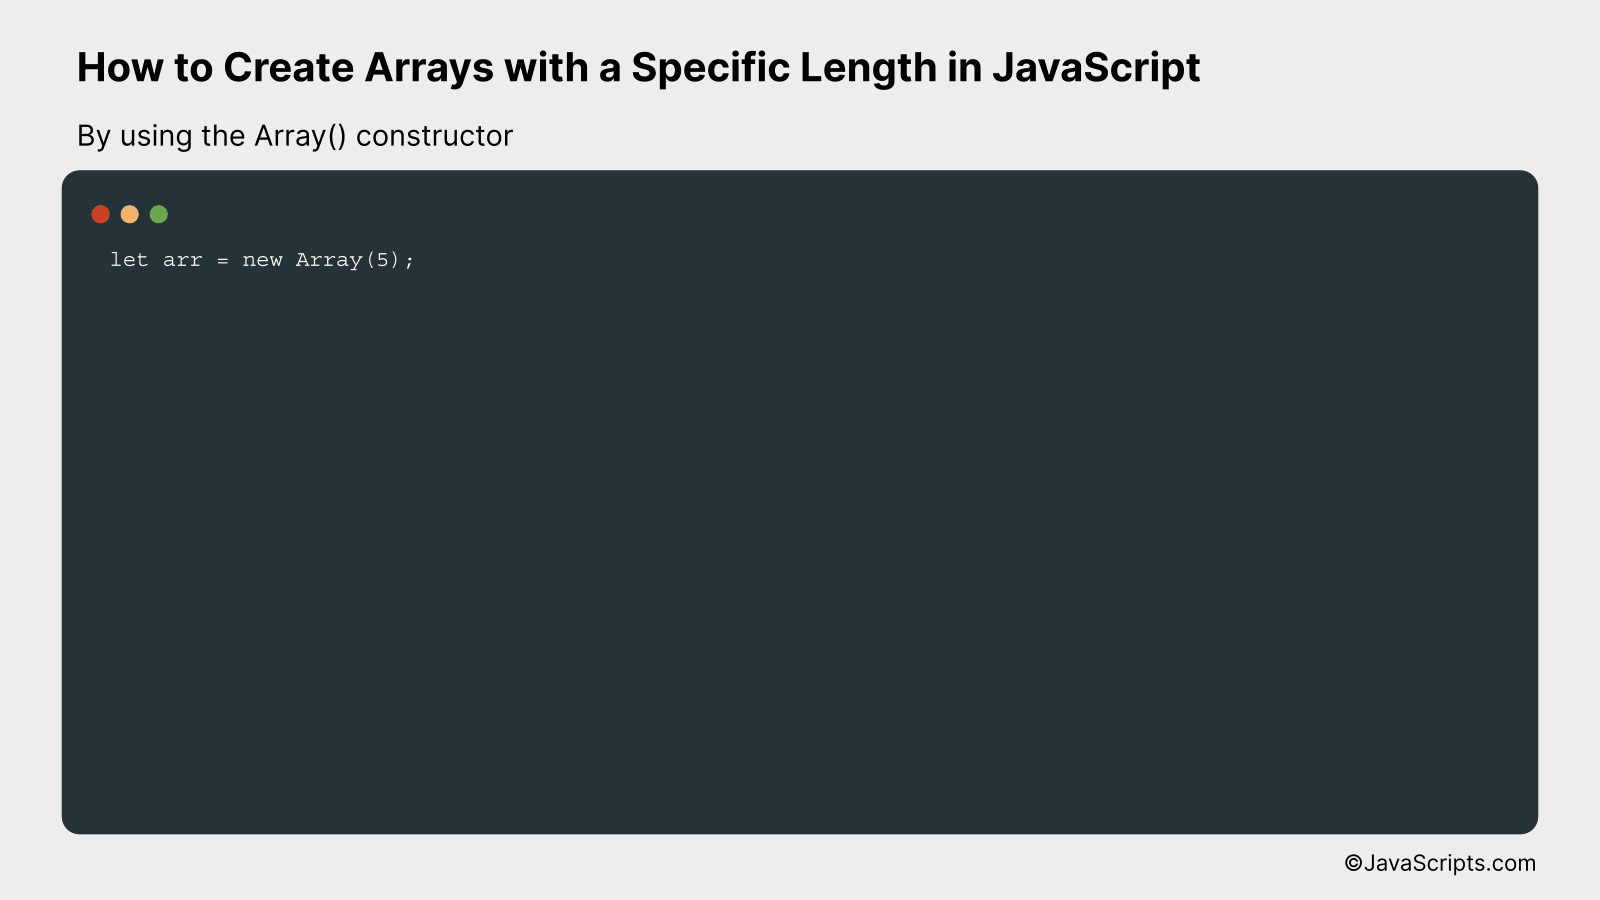 By using the Array() constructor